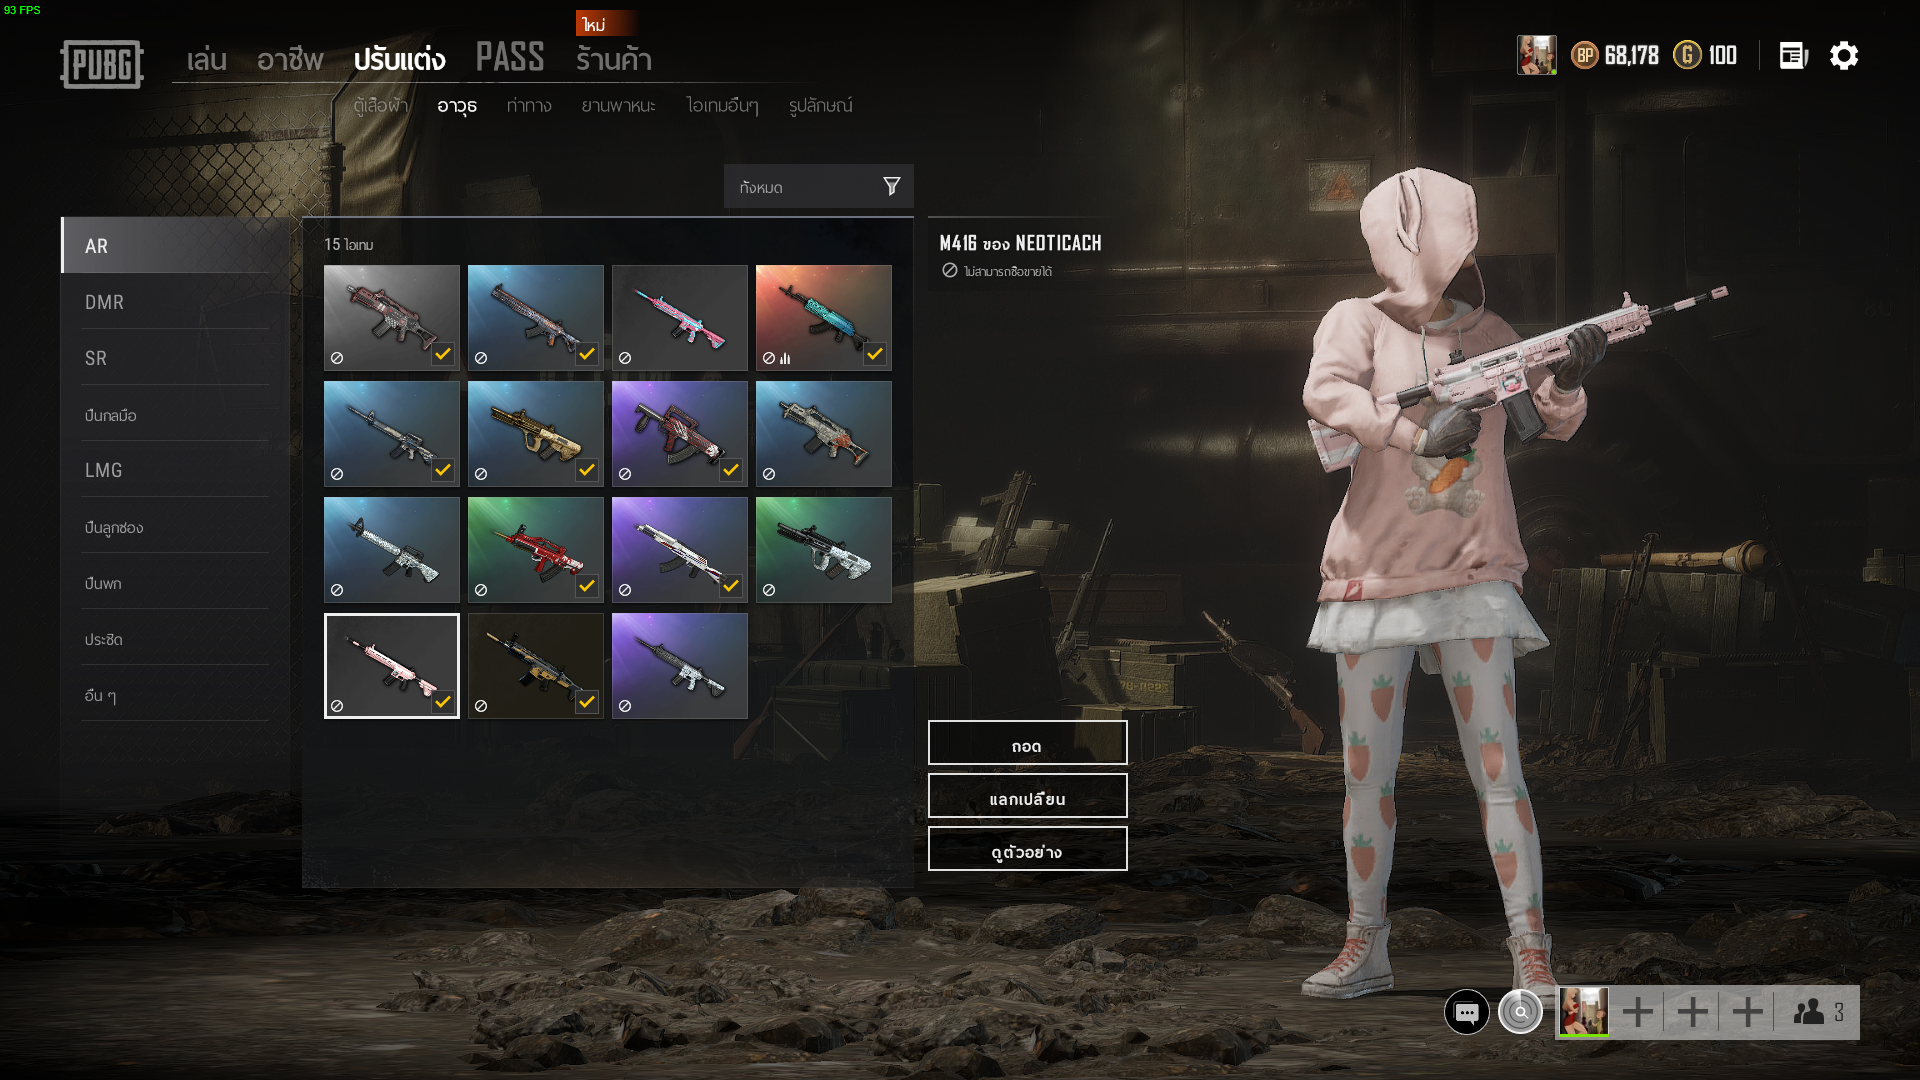 Selling Sell Account Pubg Steam Lv 500 M416 Neoticach Skin Epicnpc Marketplace